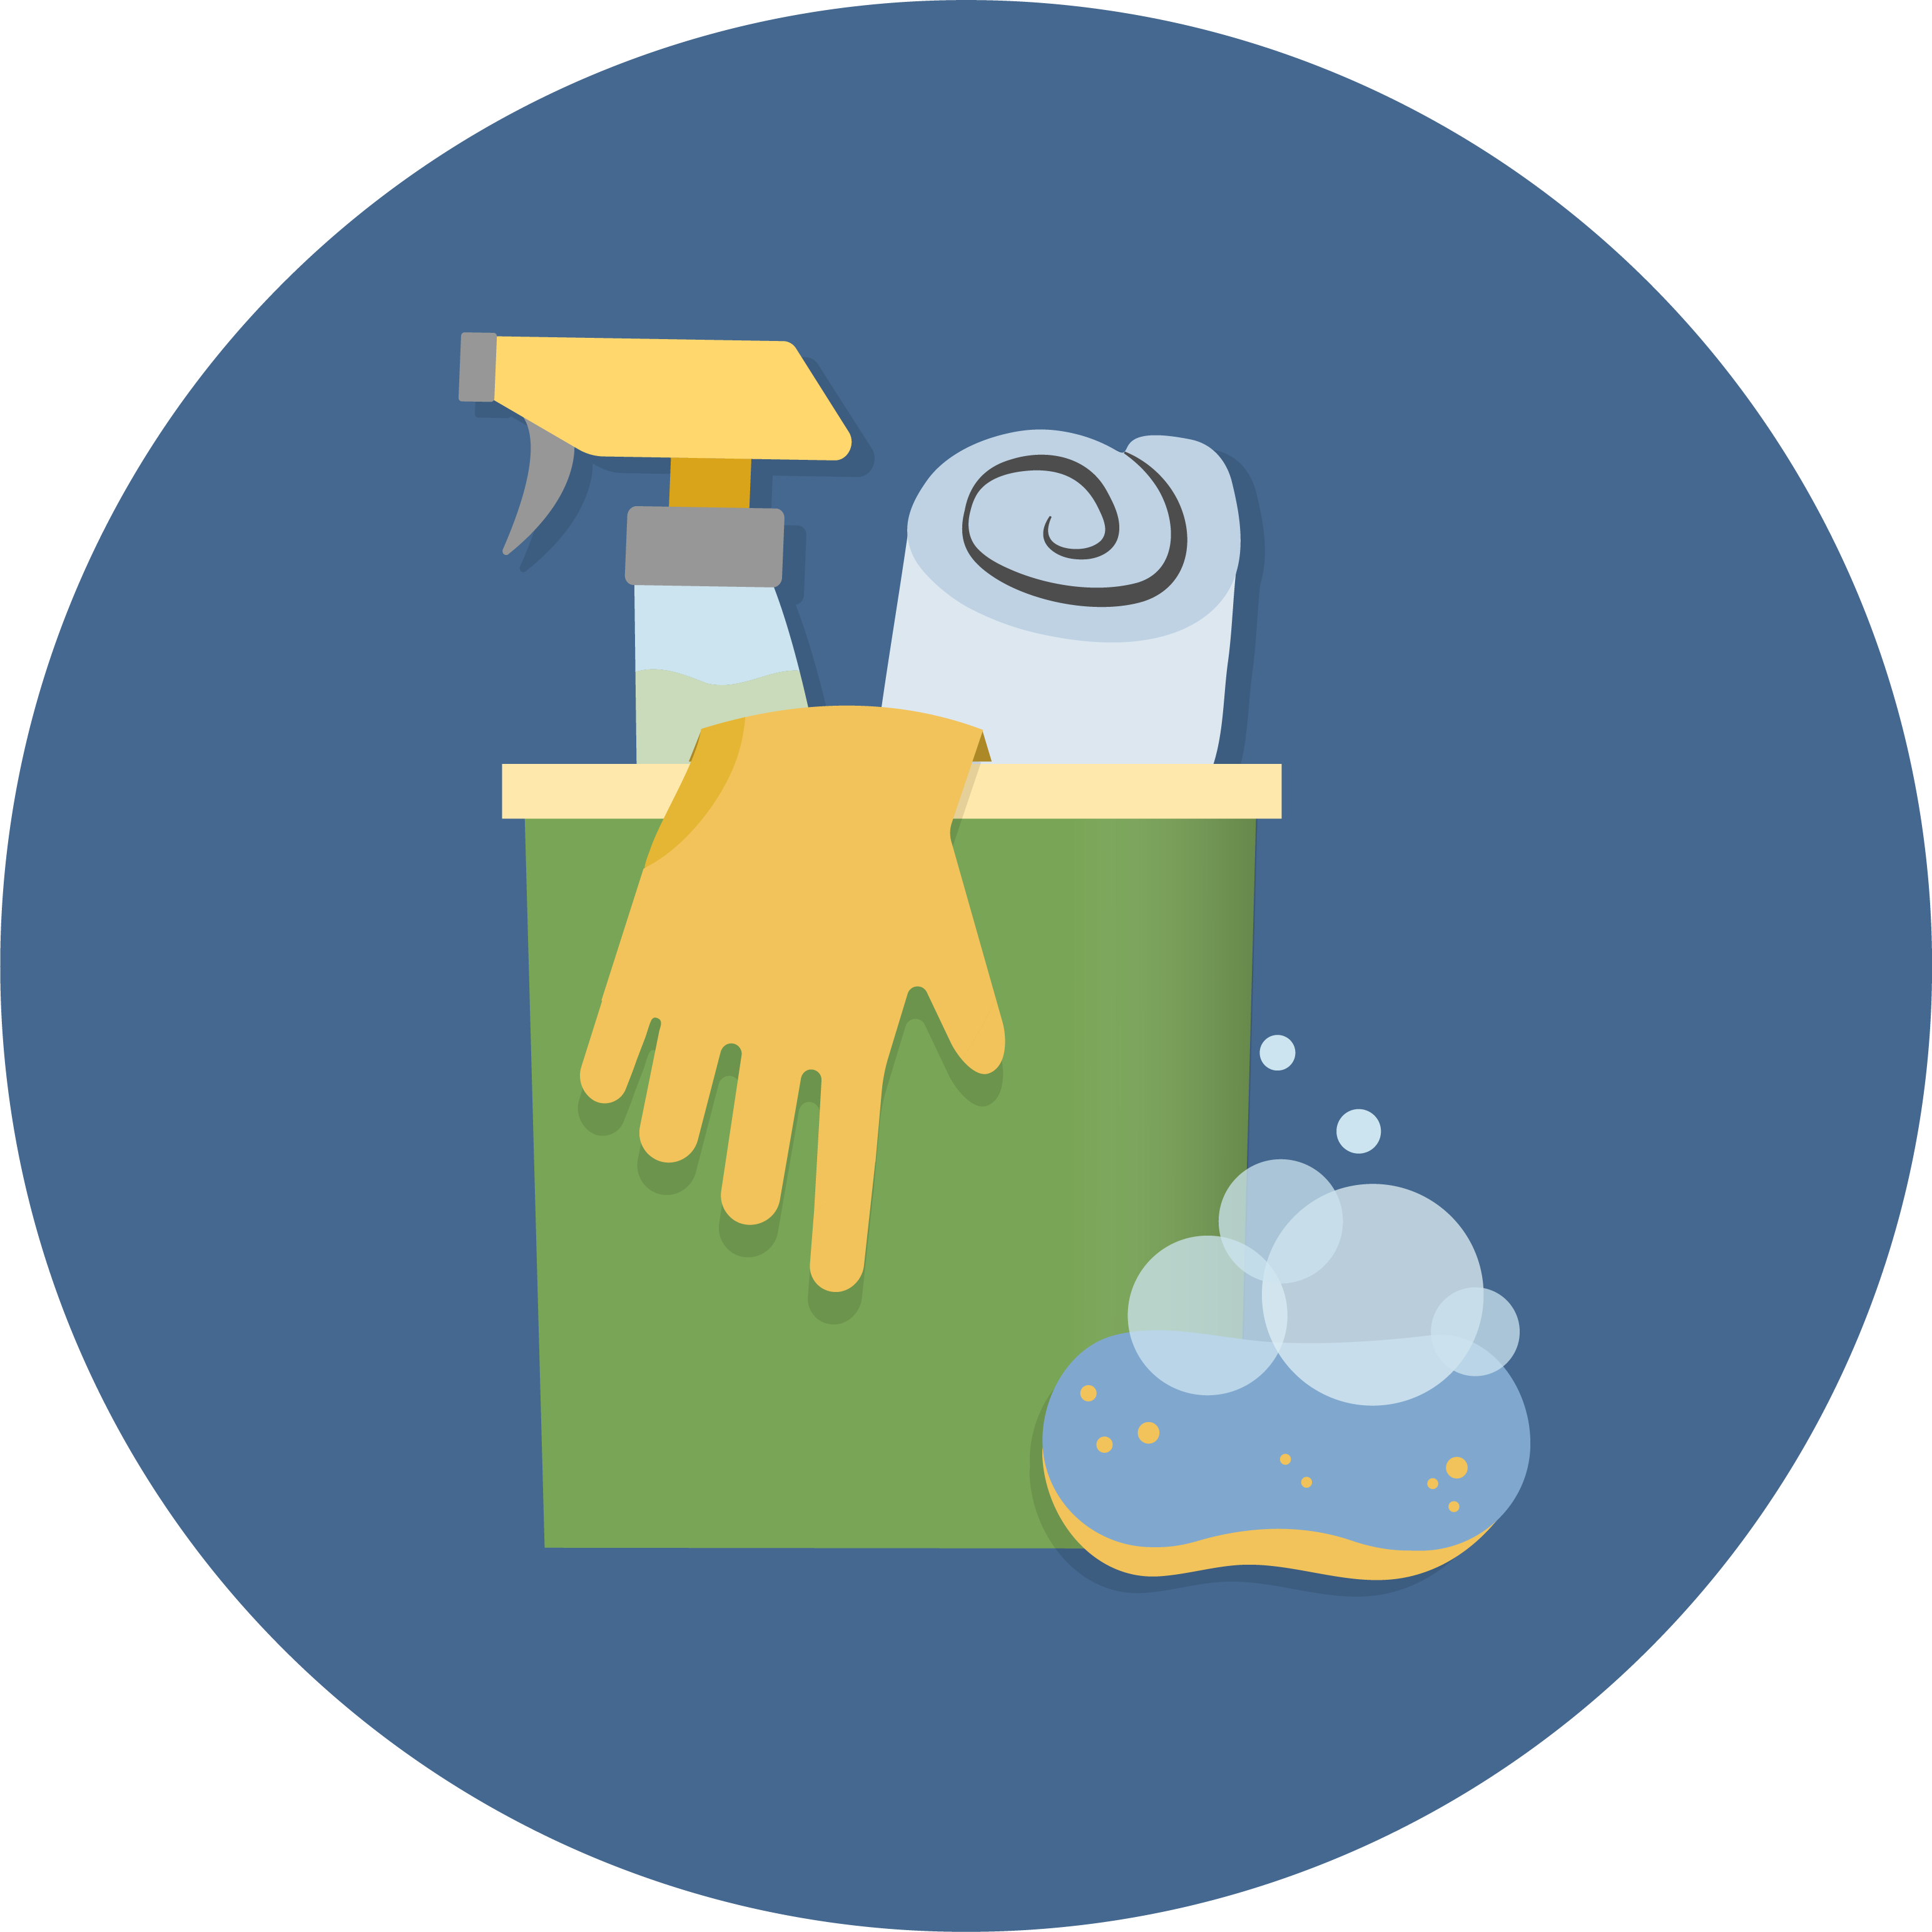 Cleaning bucket icon. Click the image to go to our Better Health Starts at Home page.